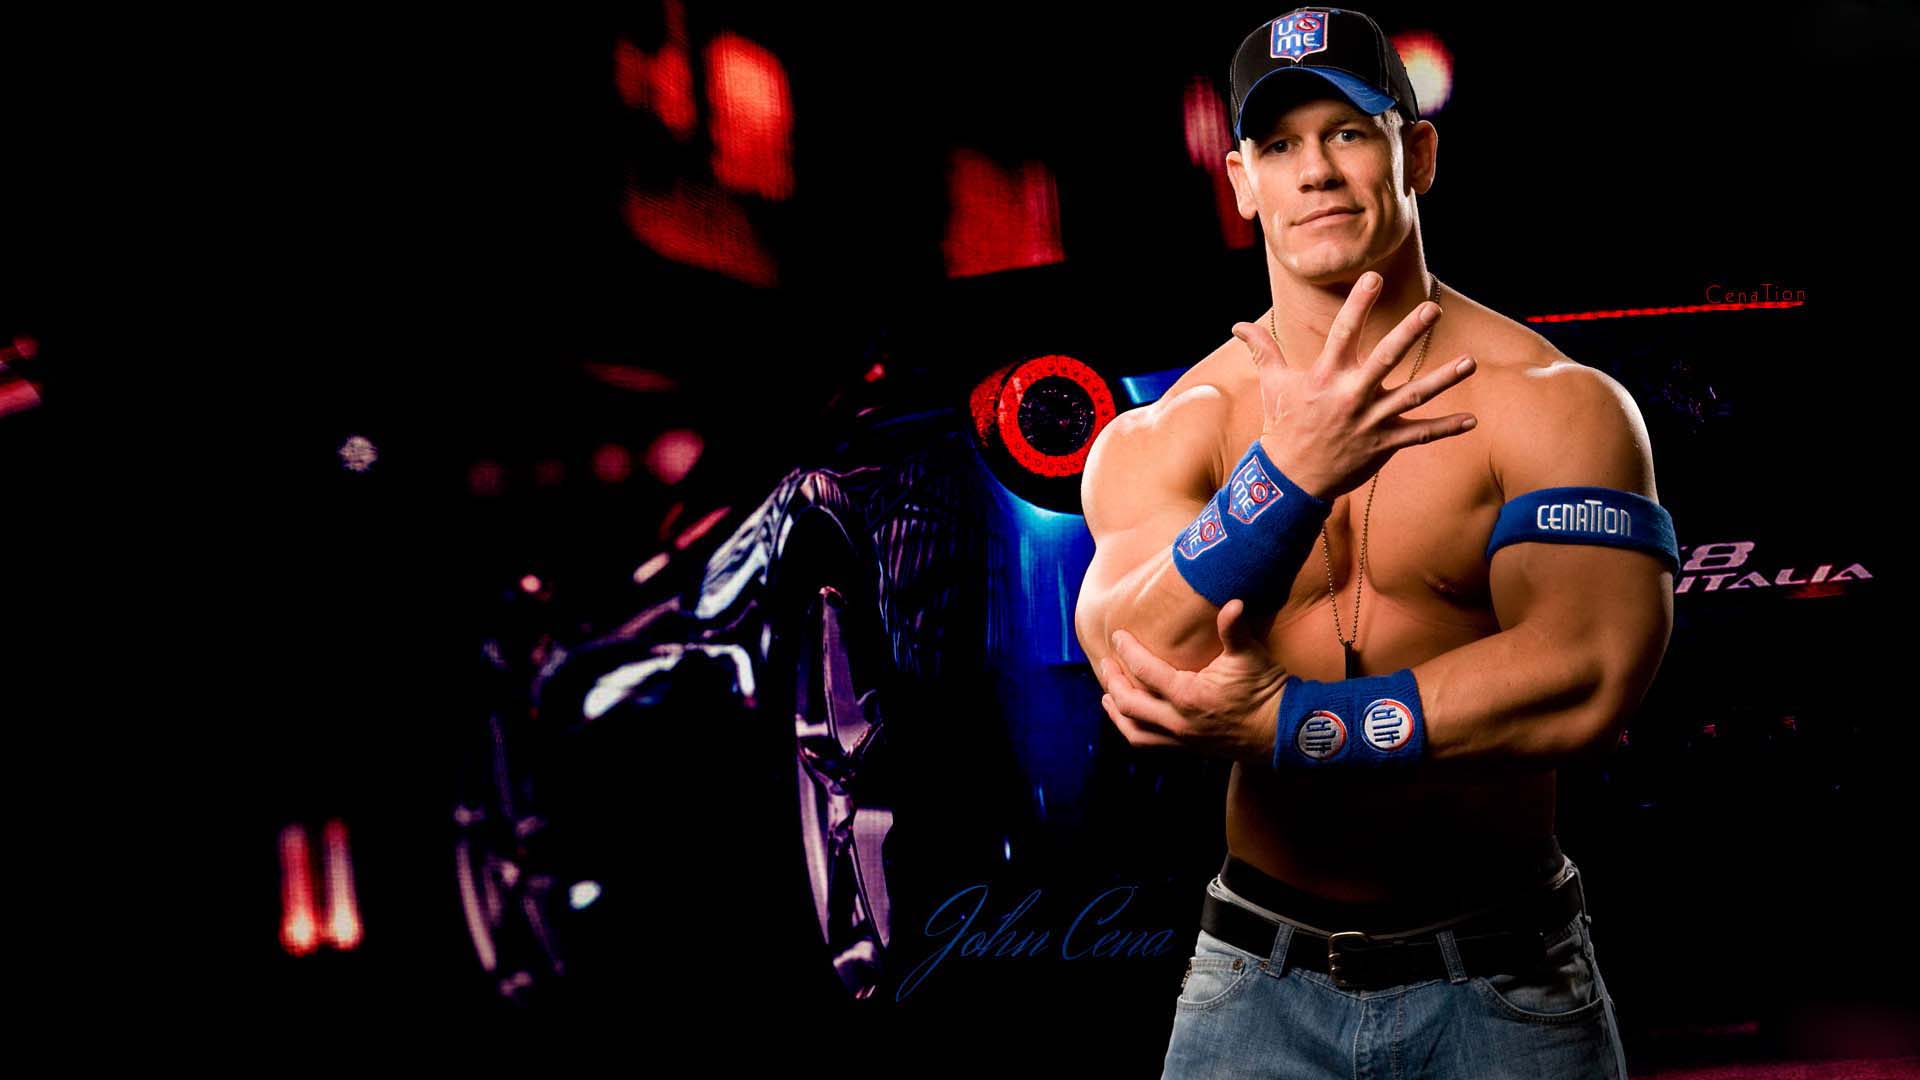 john cena top 40 best hd wallpapers for android mobile - Never Give Up :)